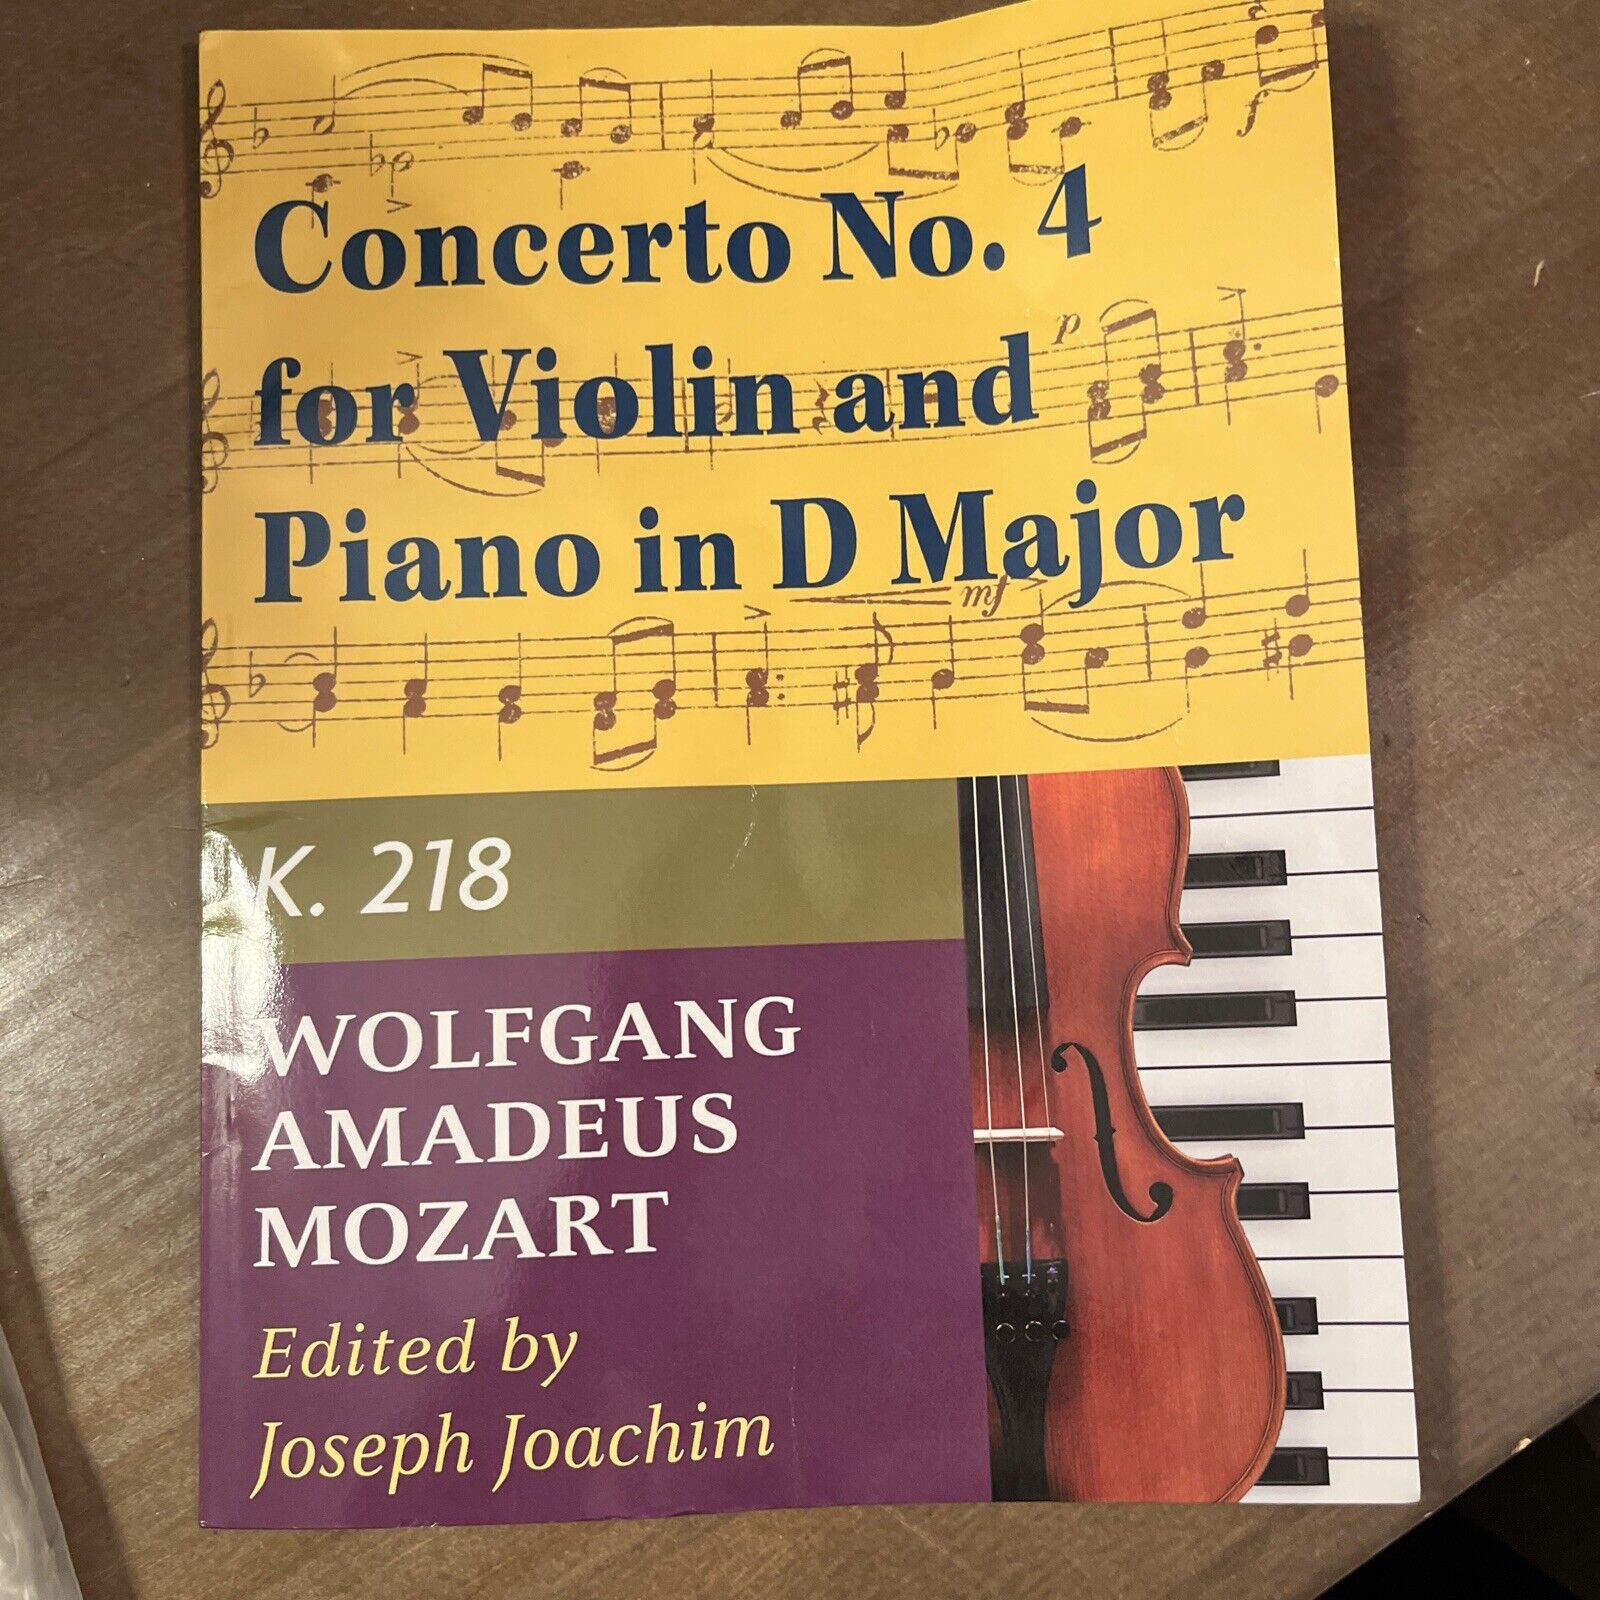 Mozart W.A. Concerto No. 4 in D Major K. 218 Violin and Piano - by J. Joachim